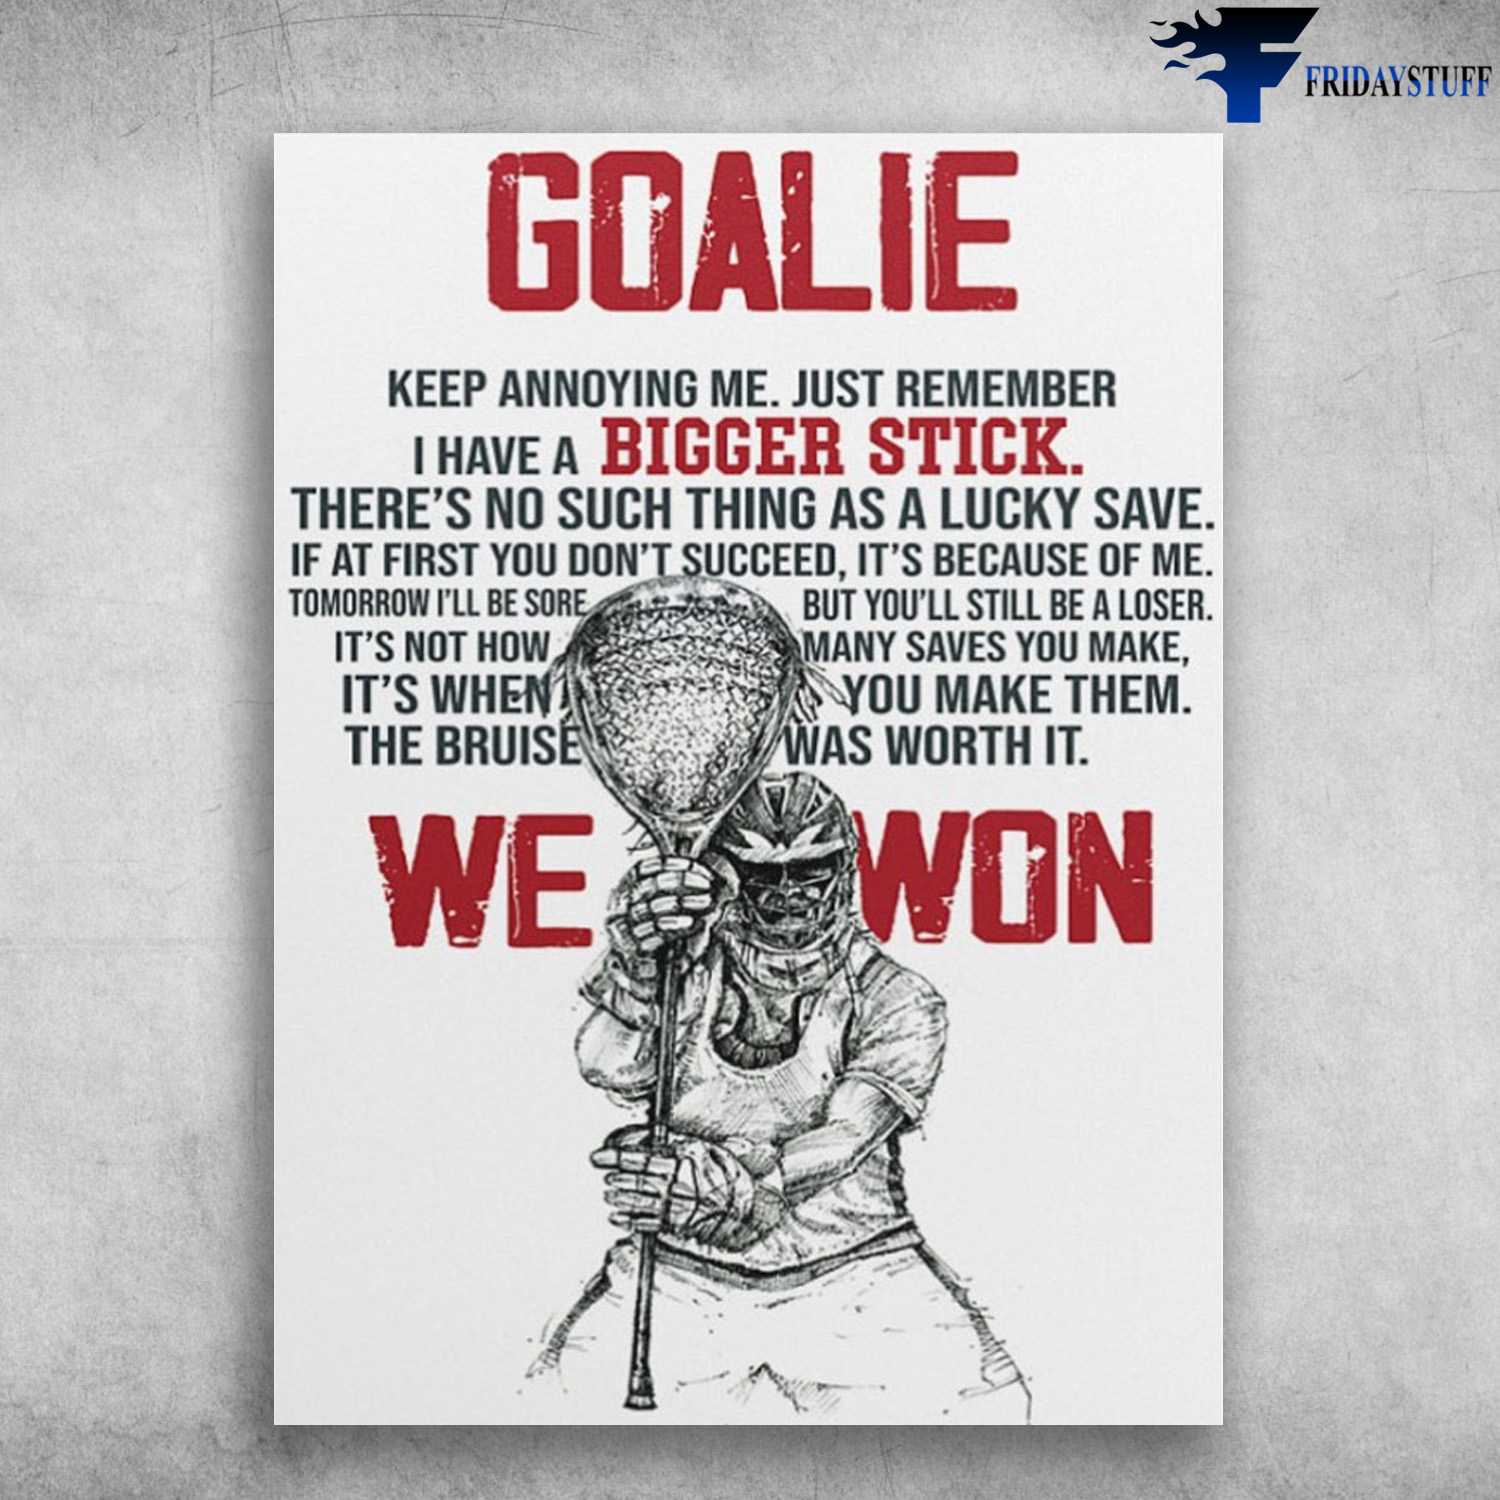 Lacrosse Poster, Lacrosse Player, Goalie, Keep Annoying Me, Just Bemember I Have A Biger Stick, There's No Such Thing As A Lucky Save